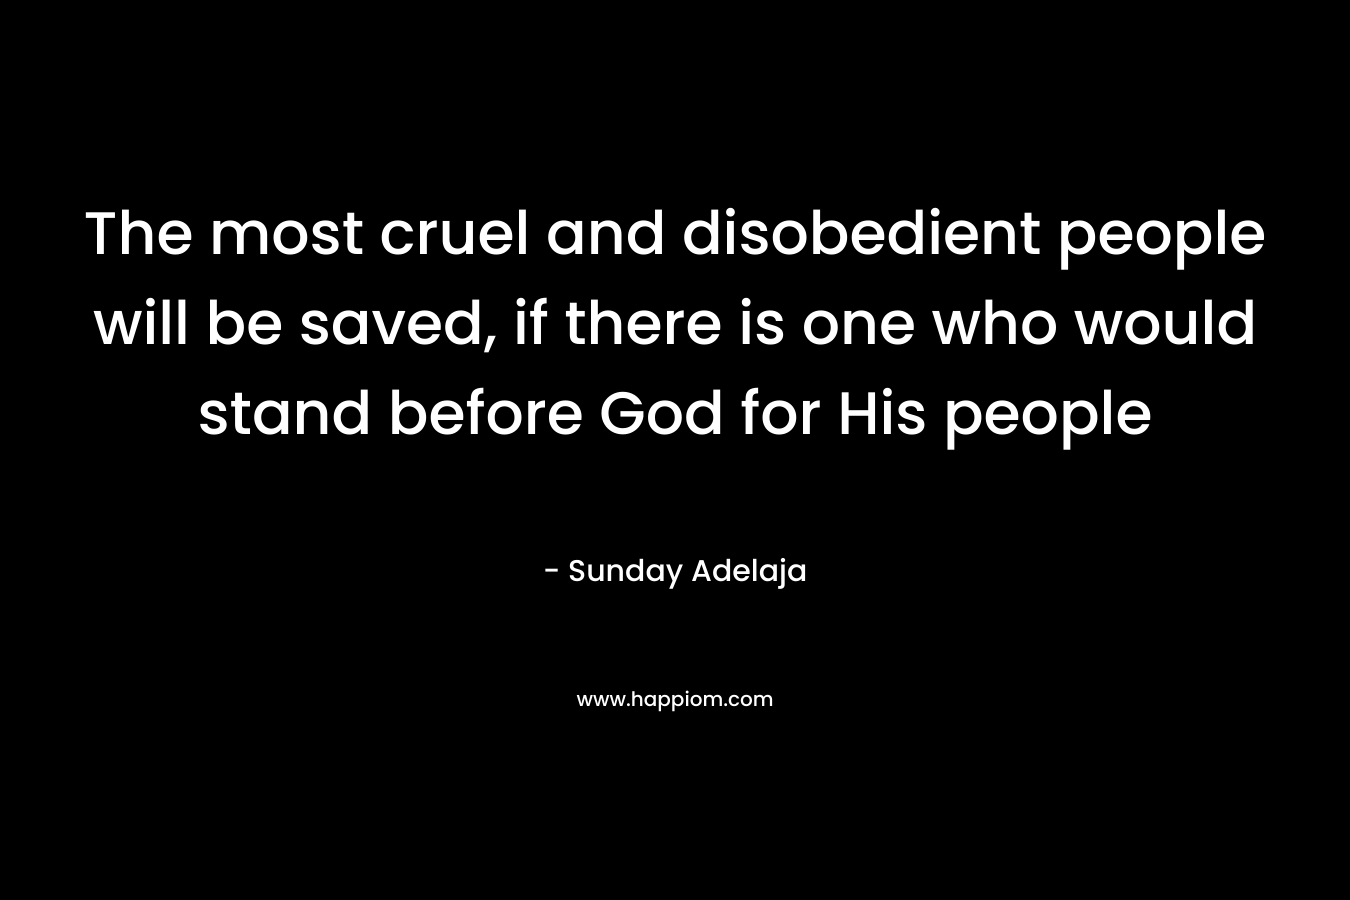 The most cruel and disobedient people will be saved, if there is one who would stand before God for His people – Sunday Adelaja